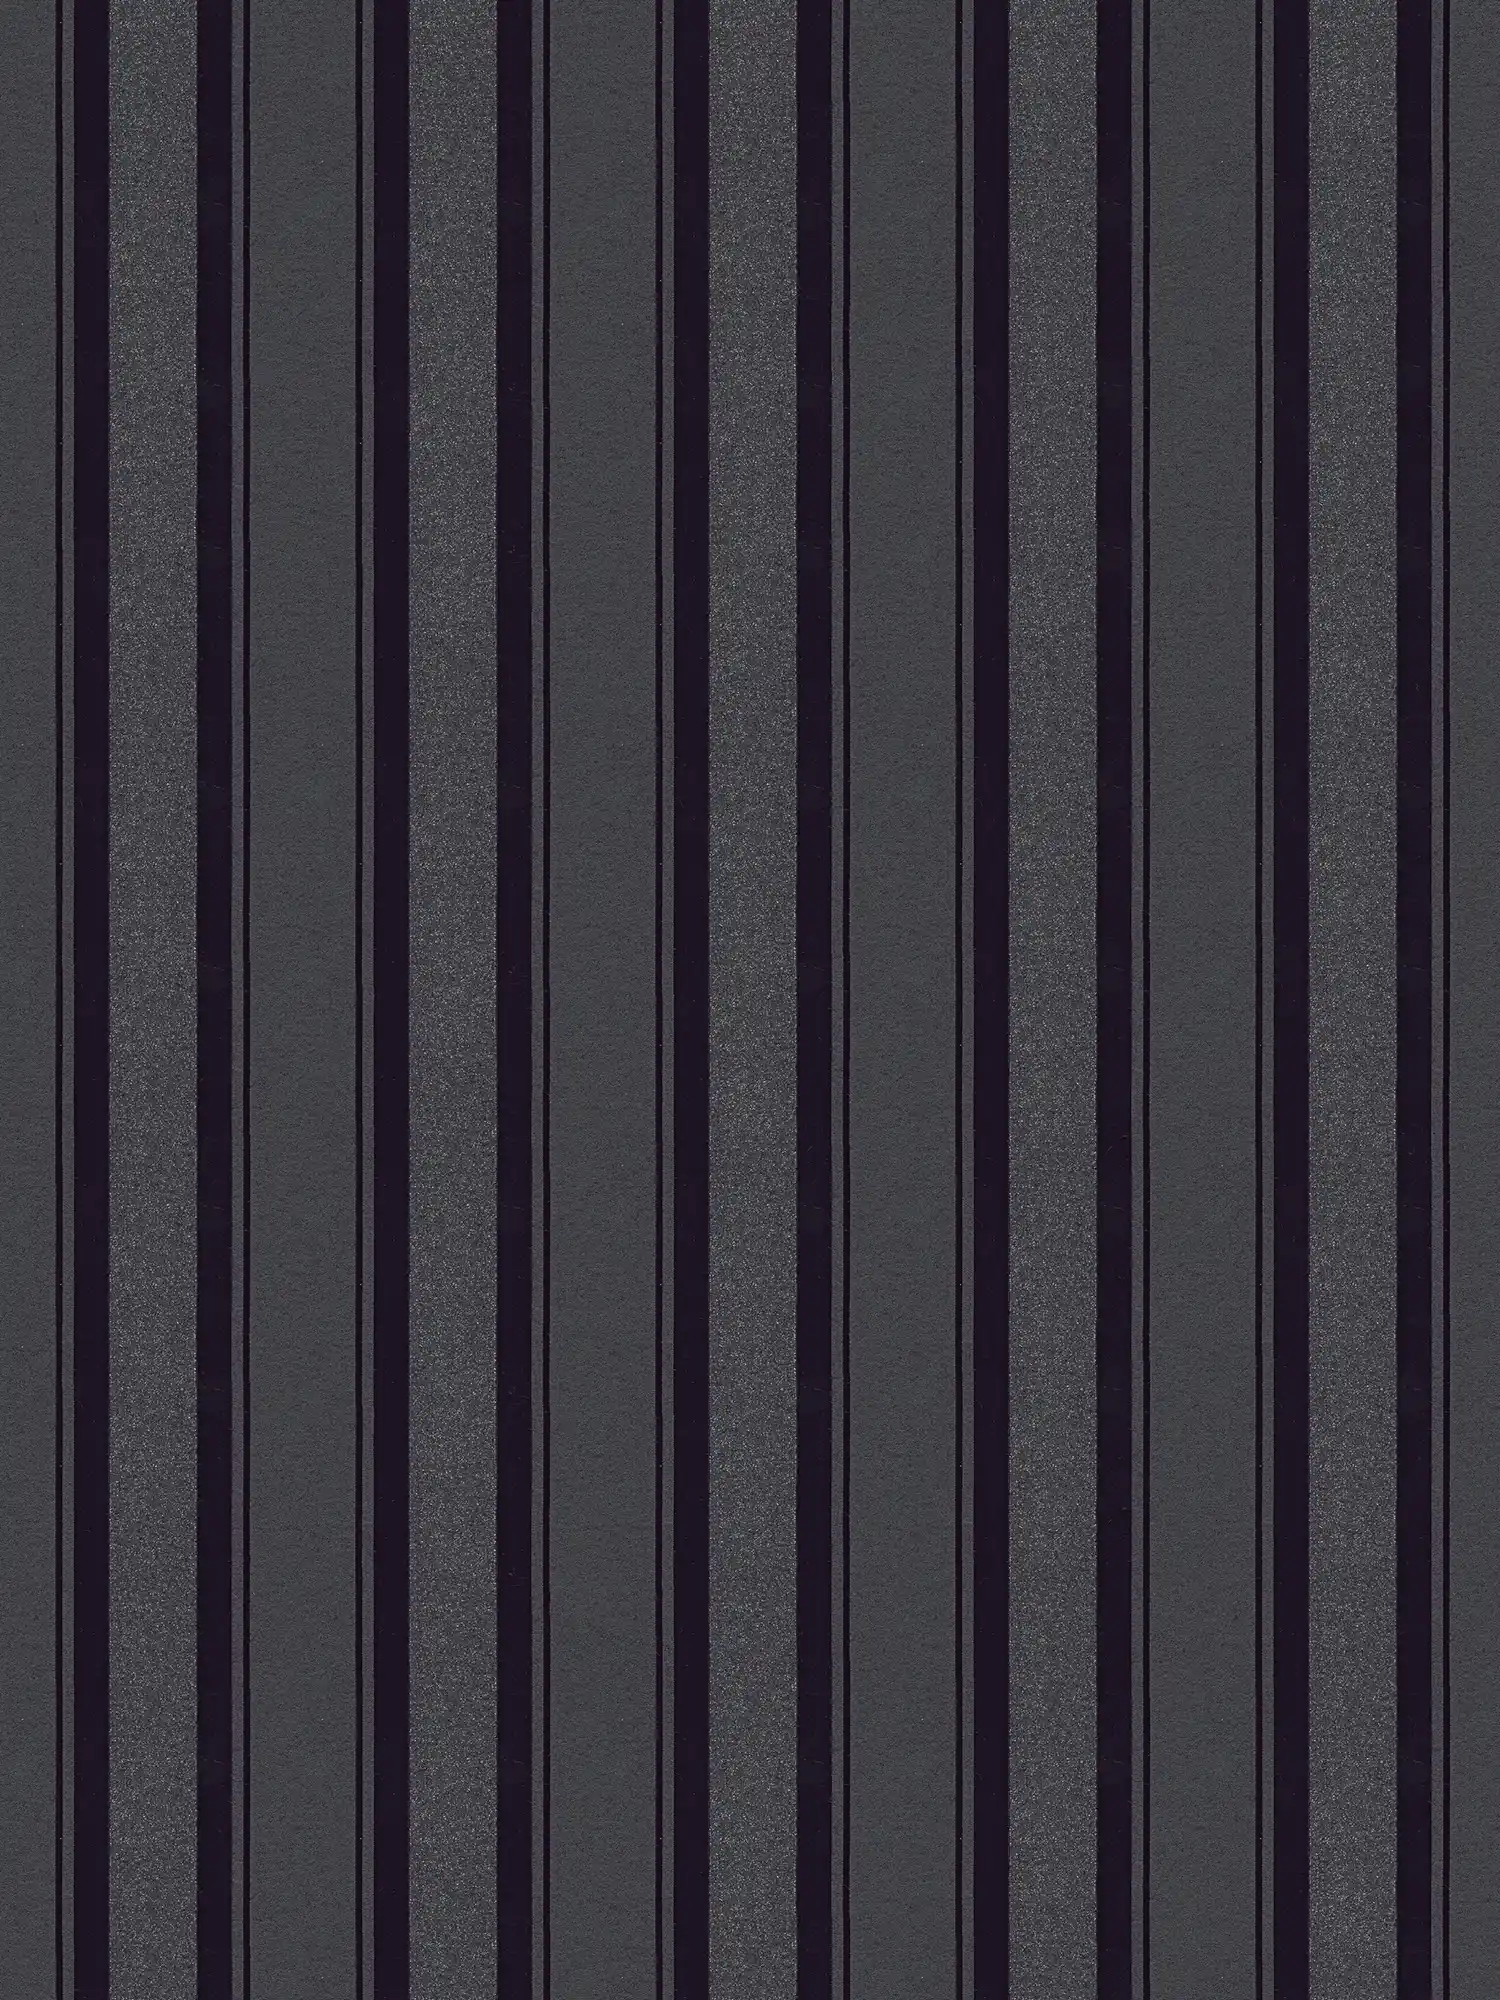 Striped wallpaper with glitter effect - black
